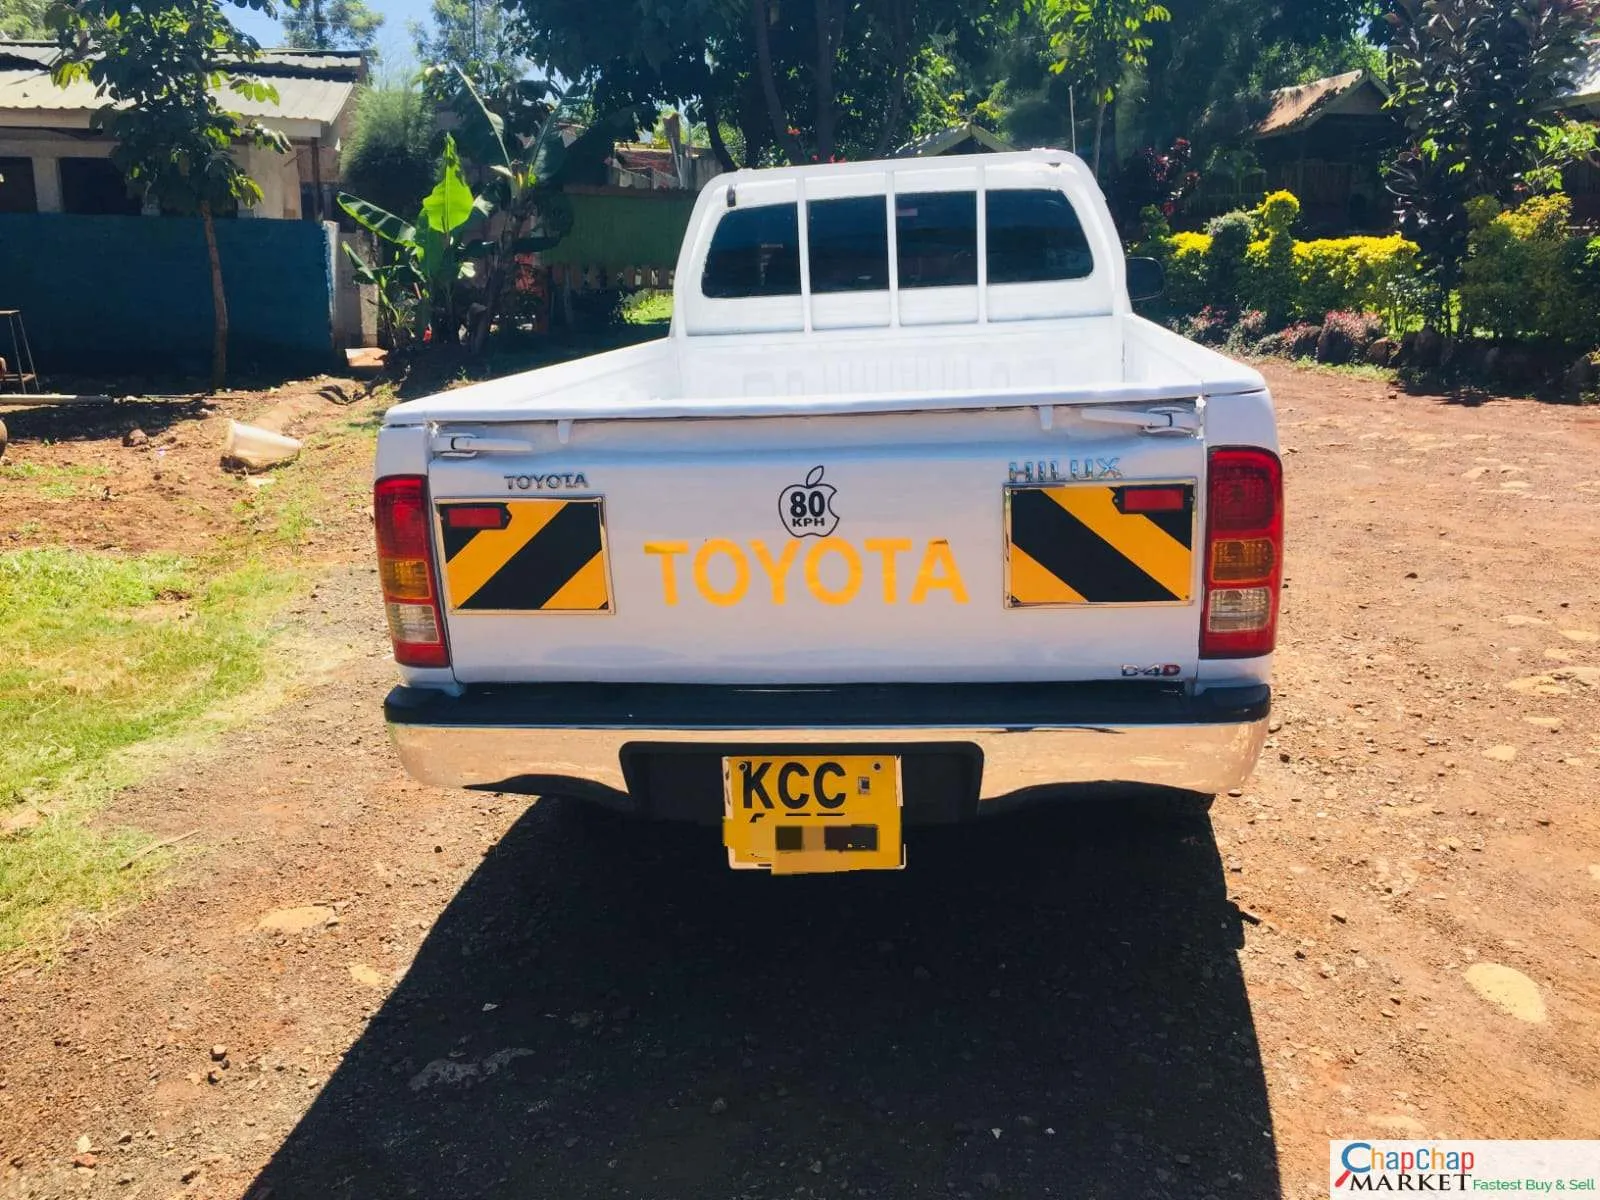 Toyota Hilux Kenya single cab You Paul 40% Deposit trade in OK Toyota Hilux for sale in kenya hire purchase installments EXCLUSIVE